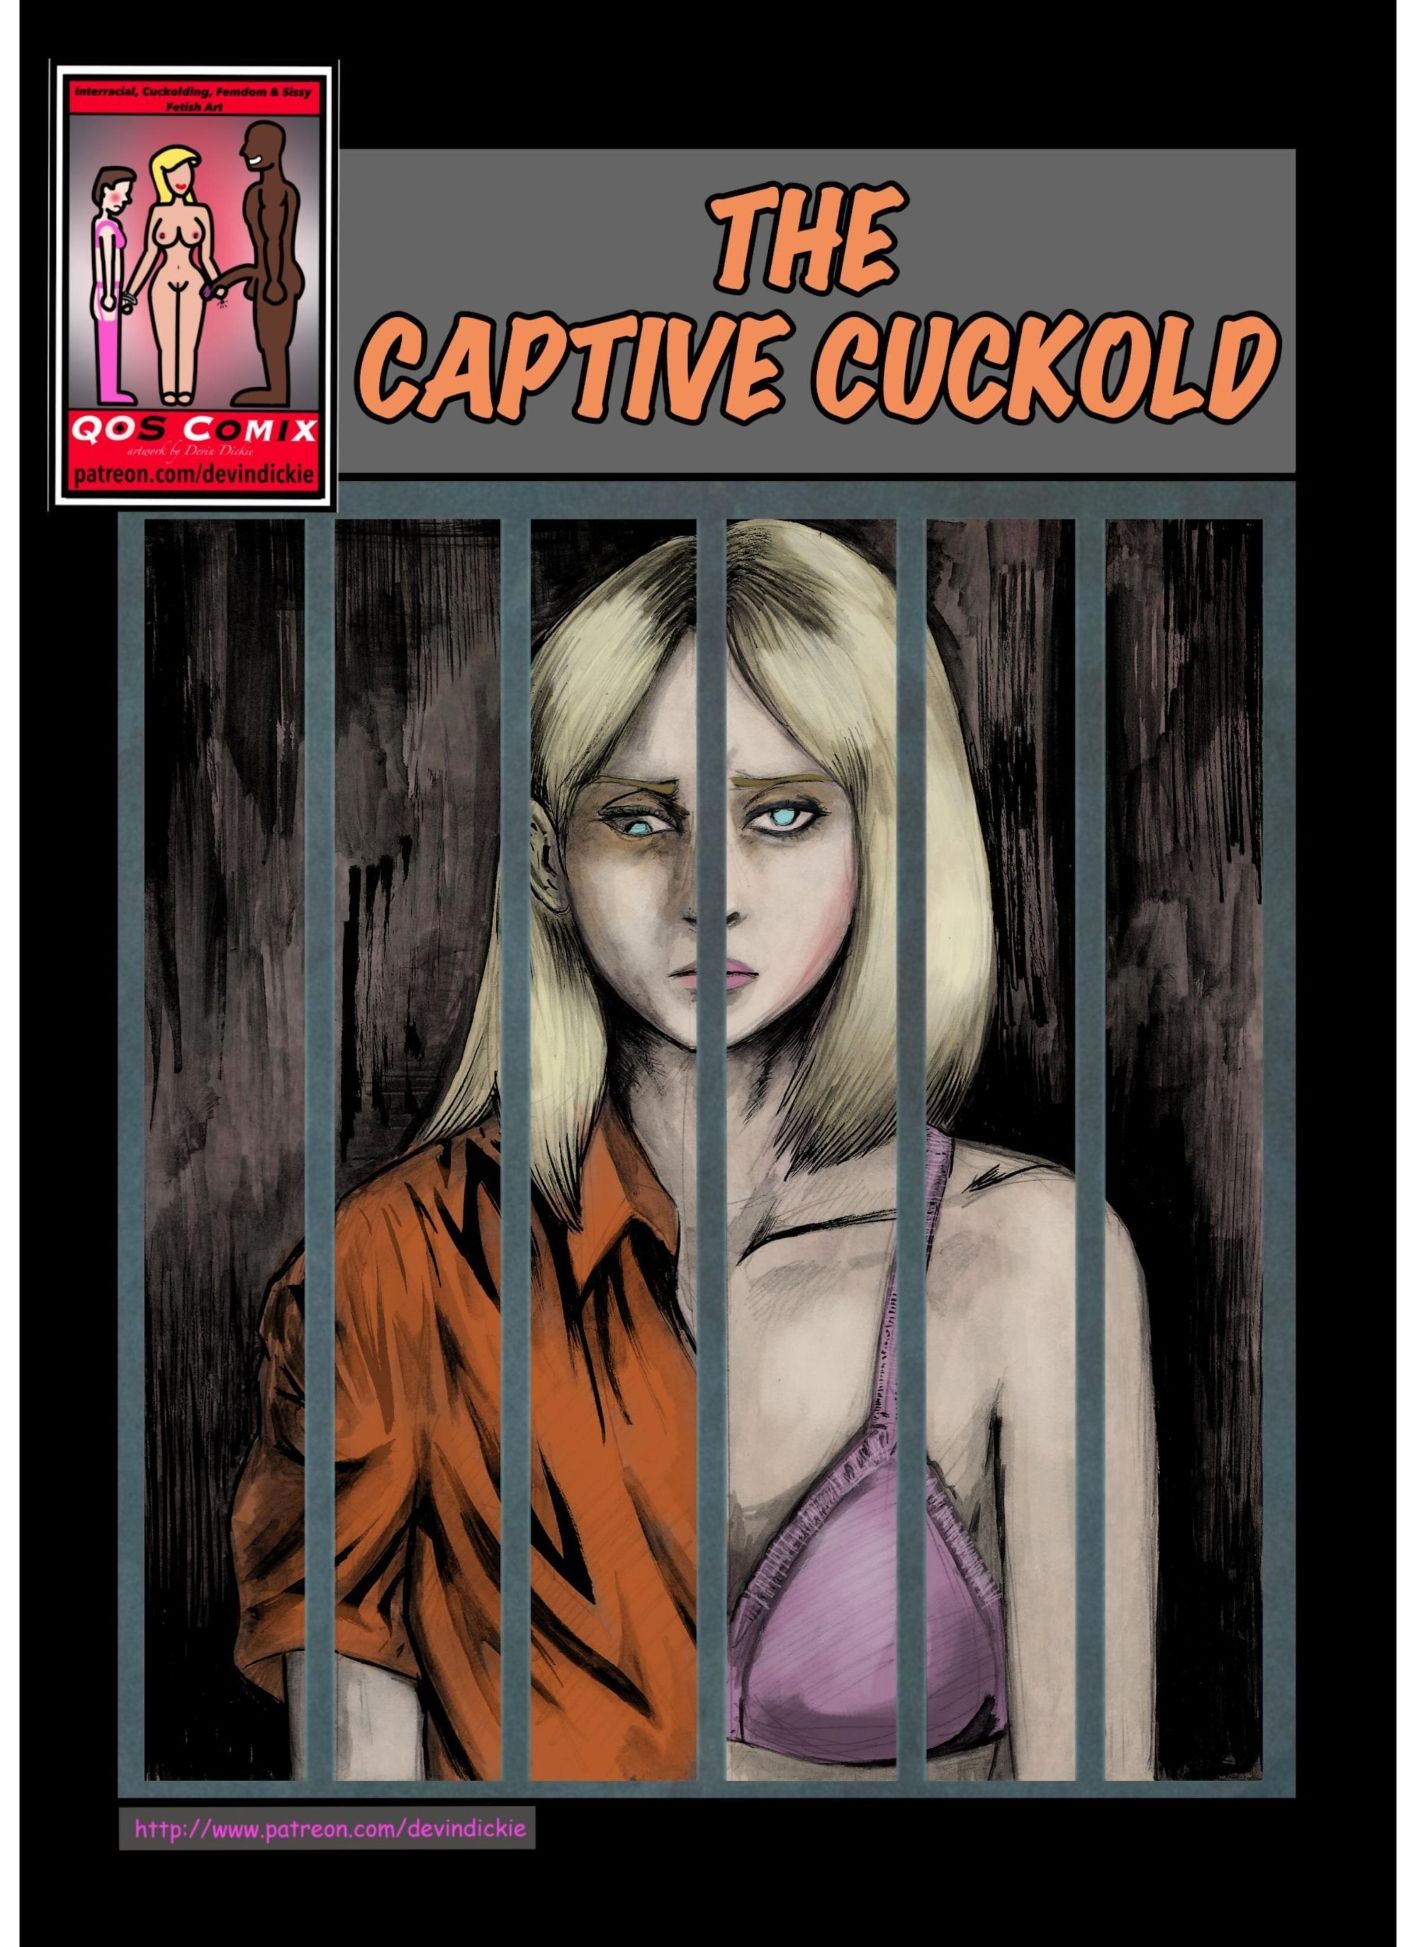 Captive Cuckold by Devin Dickie